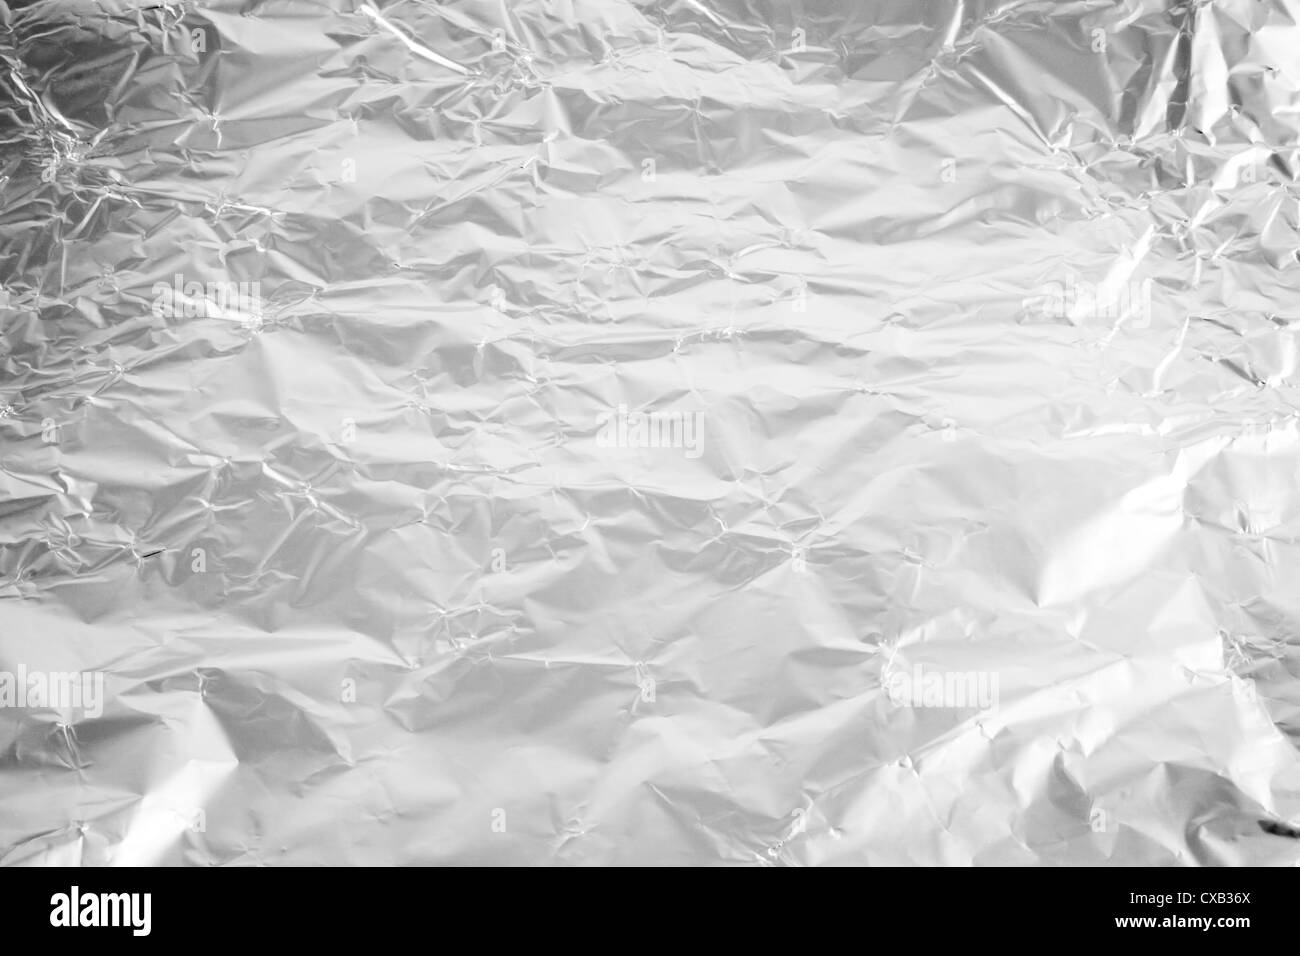 Background from wrinkled aluminum foil for cooking Stock Photo